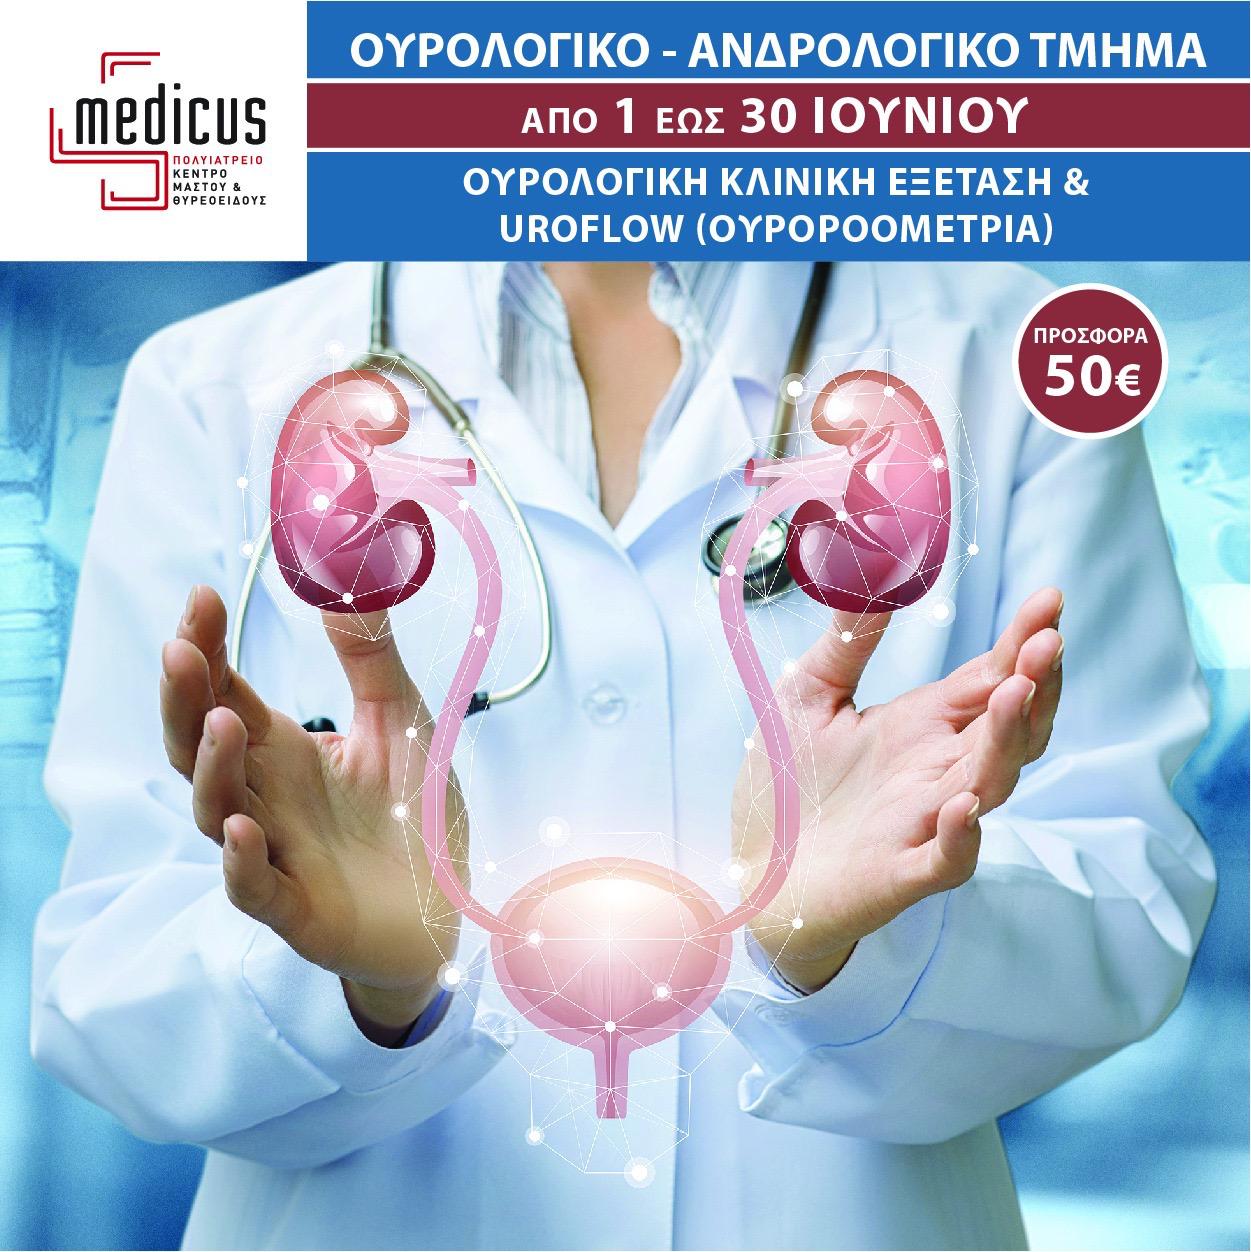 urology department discount package for the month of June